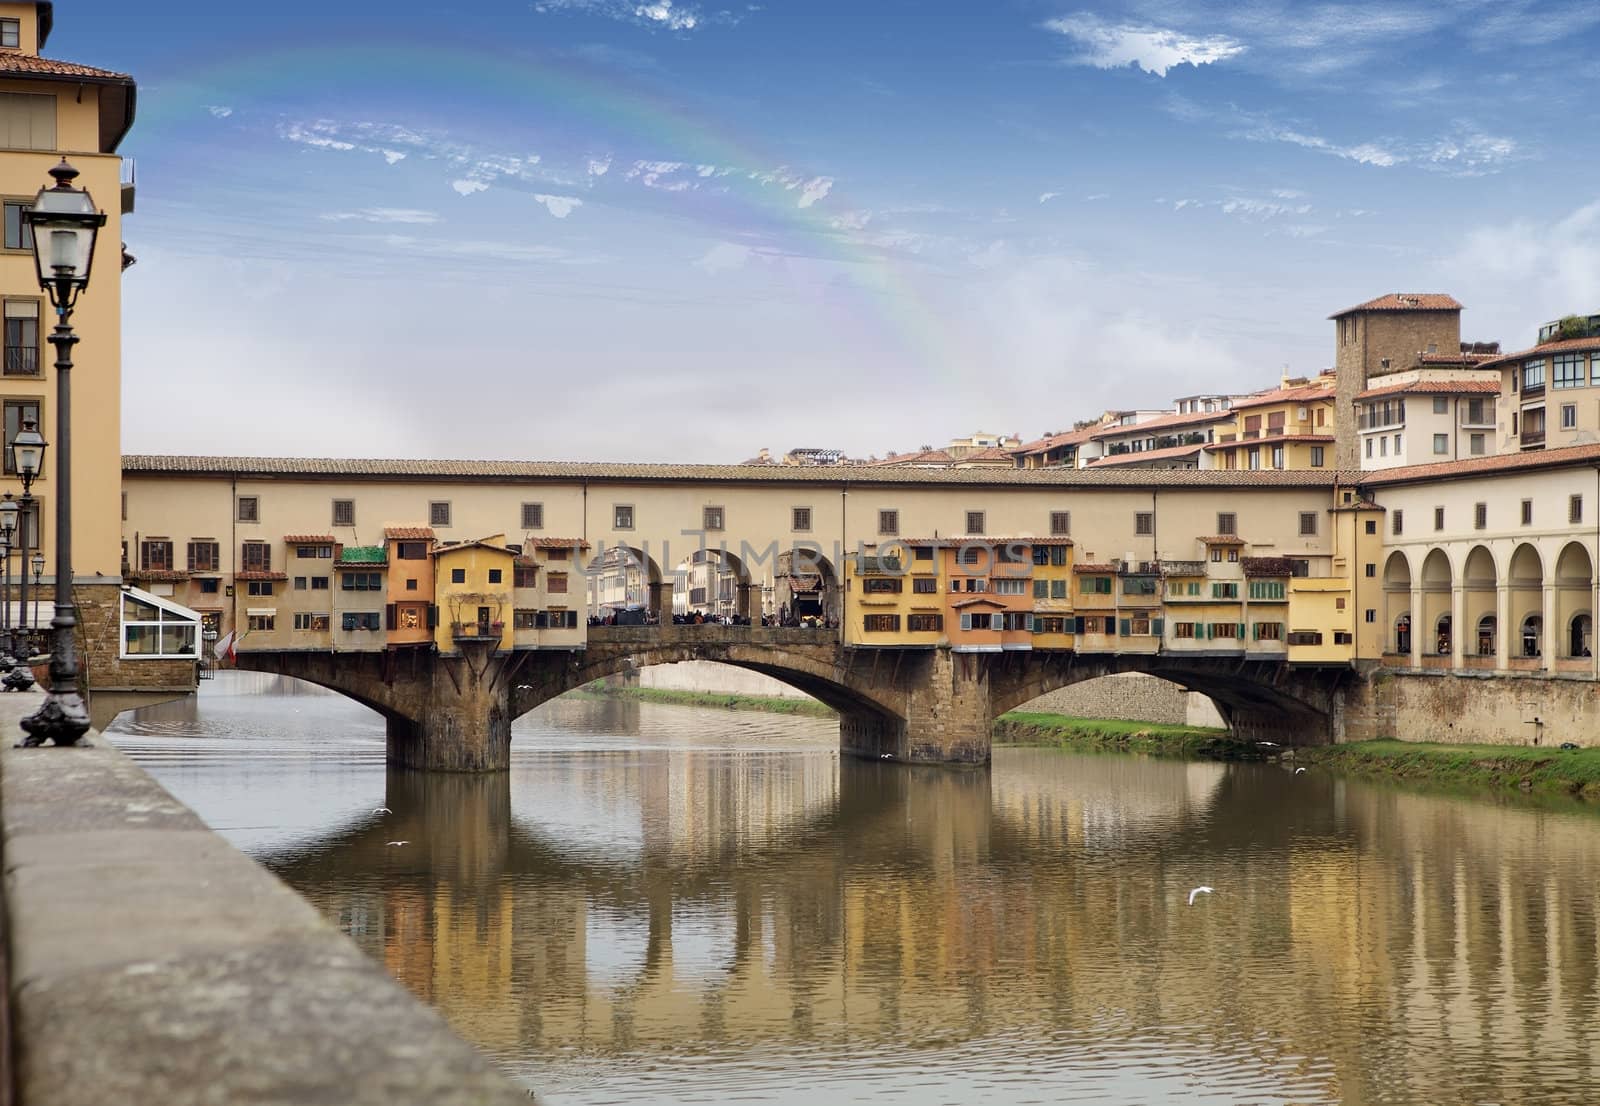 Florence, Italy: Ponte vecchio, Old Bridge, on the Arno river with rainbow in the sky in the background